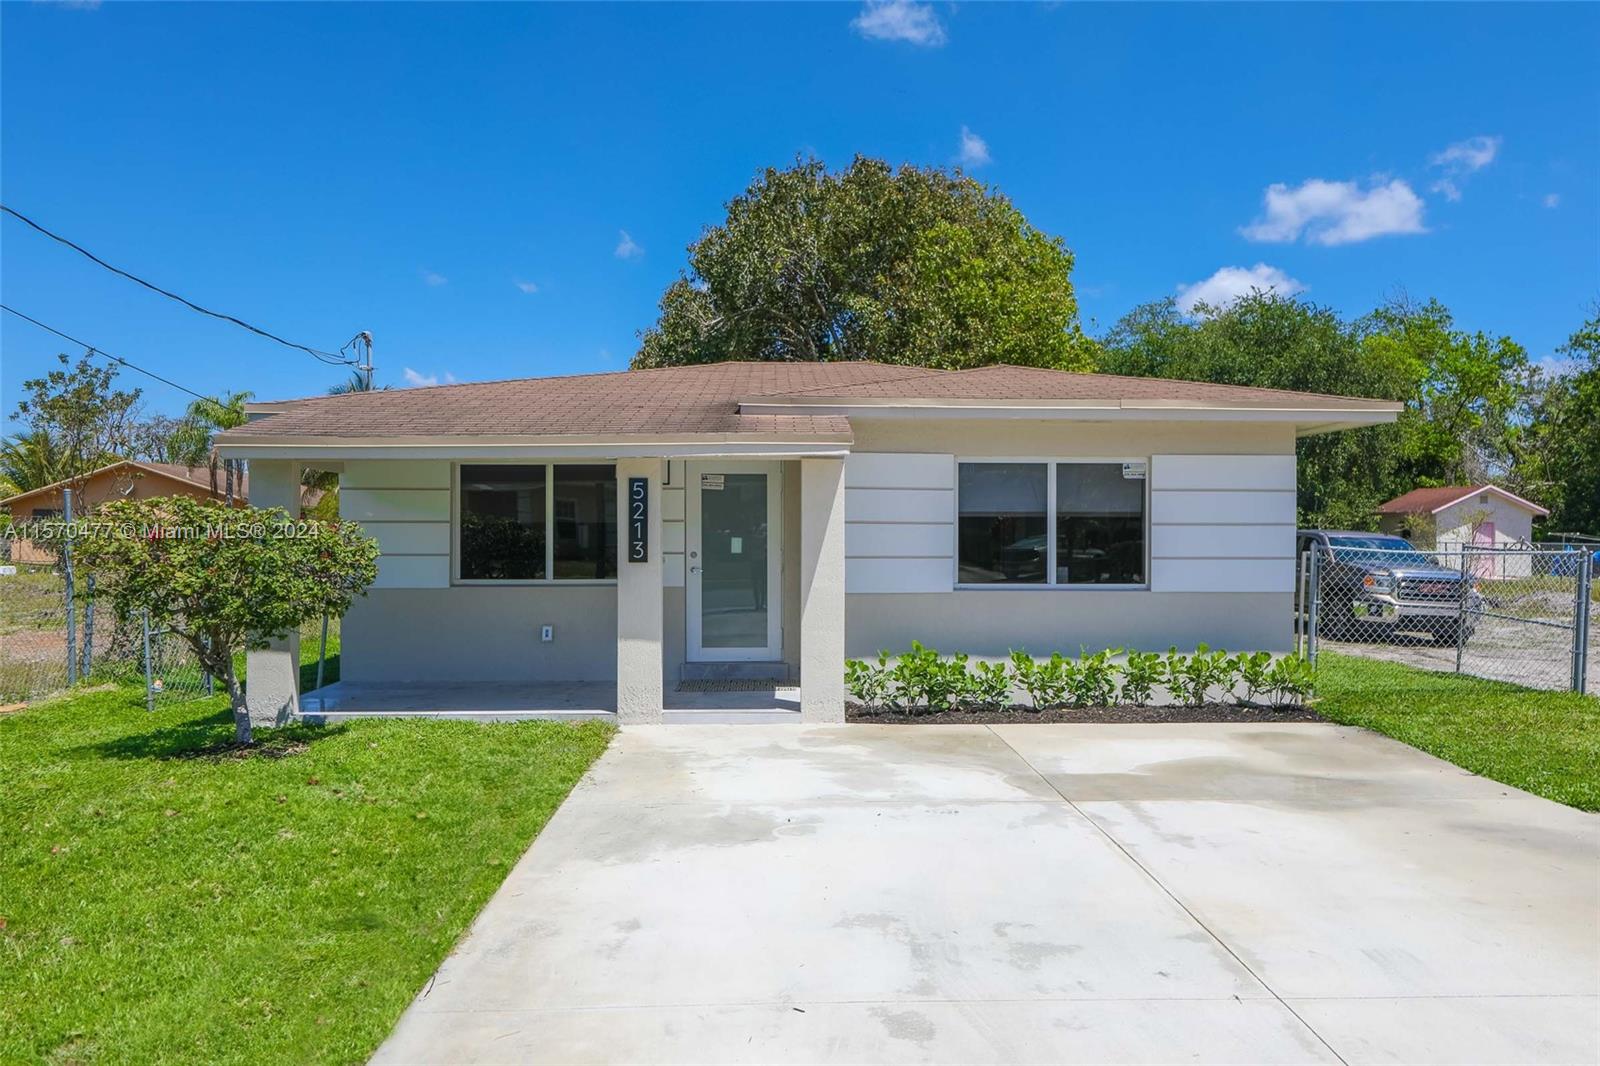 Property for Sale at 5213 Sw 22nd St St, West Park, Broward County, Florida - Bedrooms: 3 
Bathrooms: 2  - $540,000